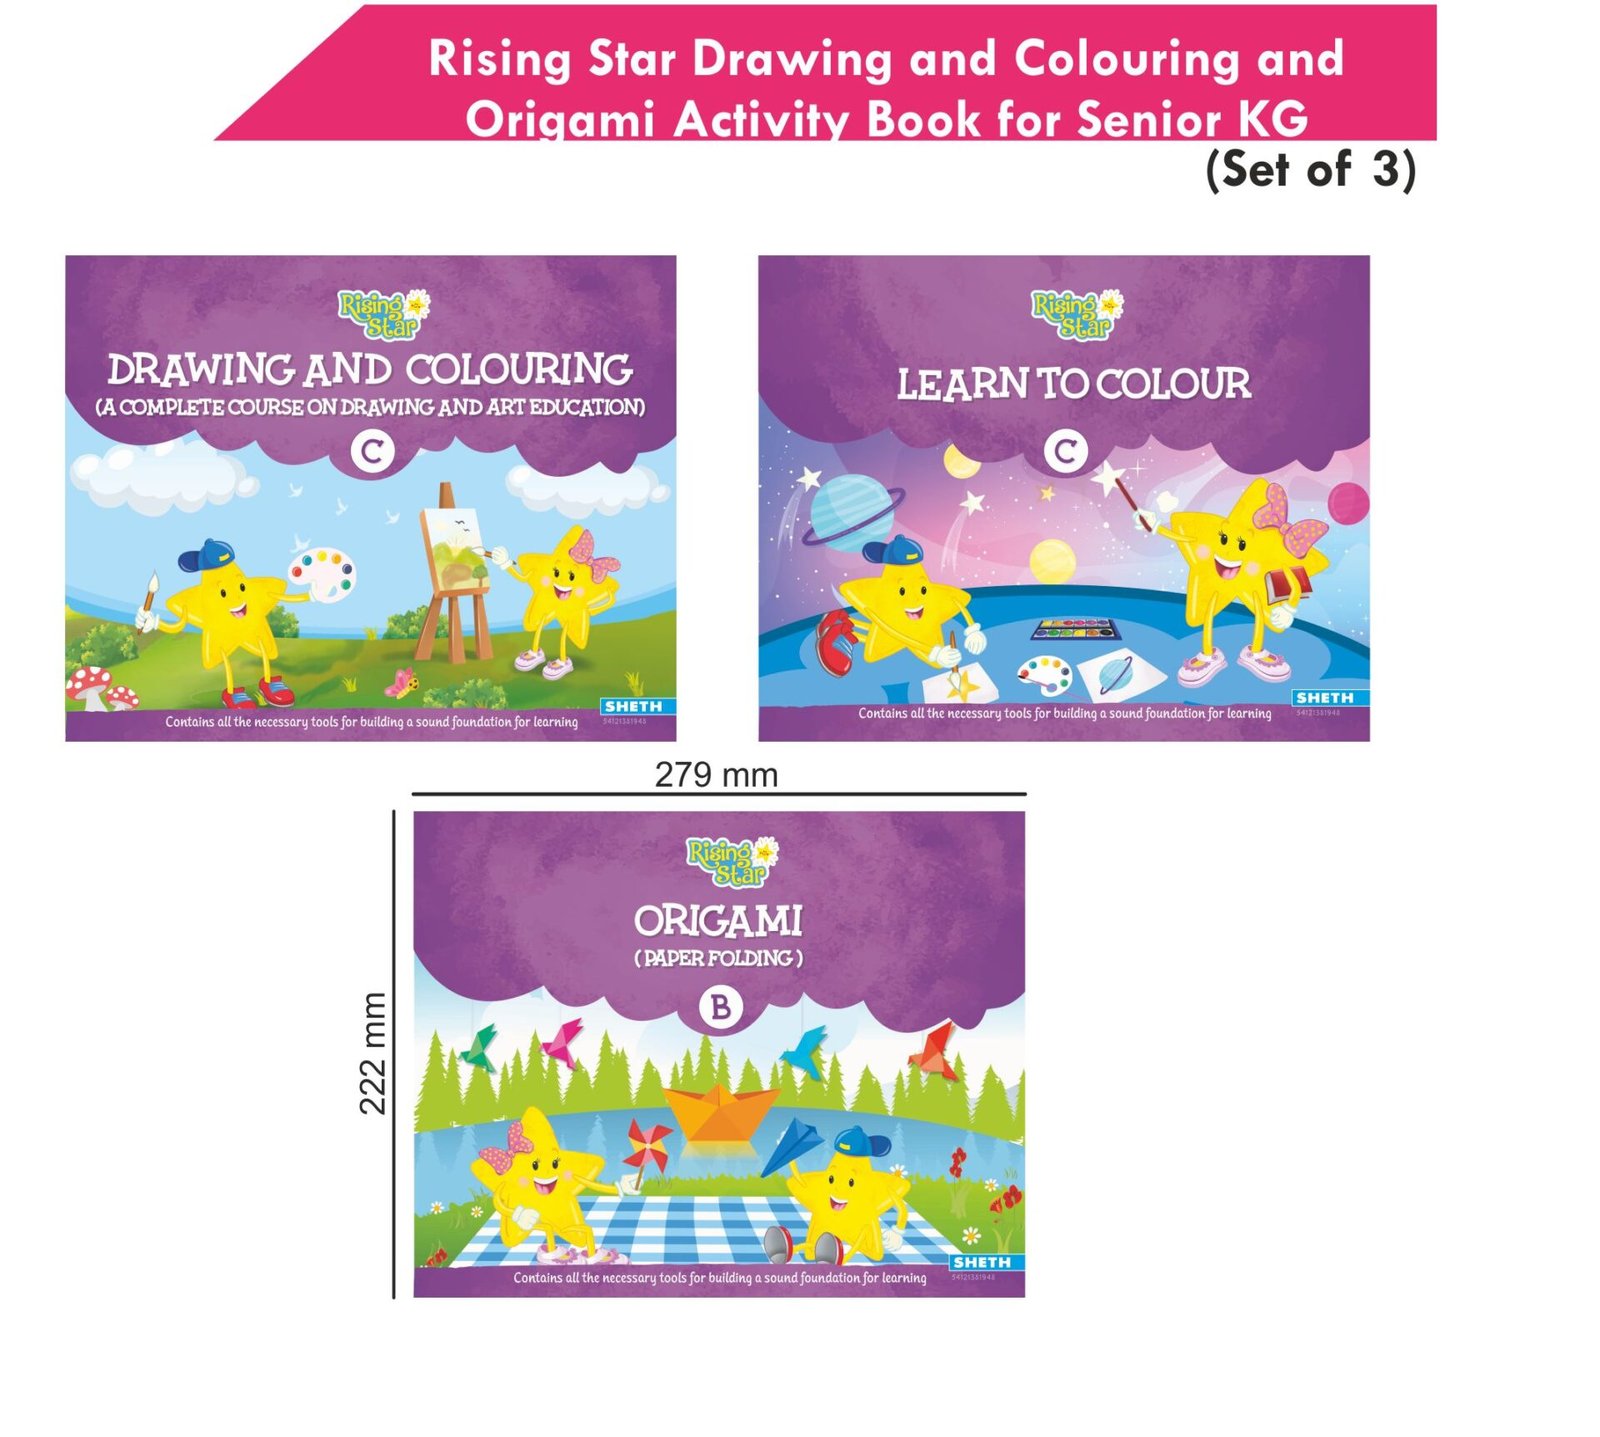 Rising Star Drawing and Colouring and Origami Activity Book for Senior KG Set of 3 2